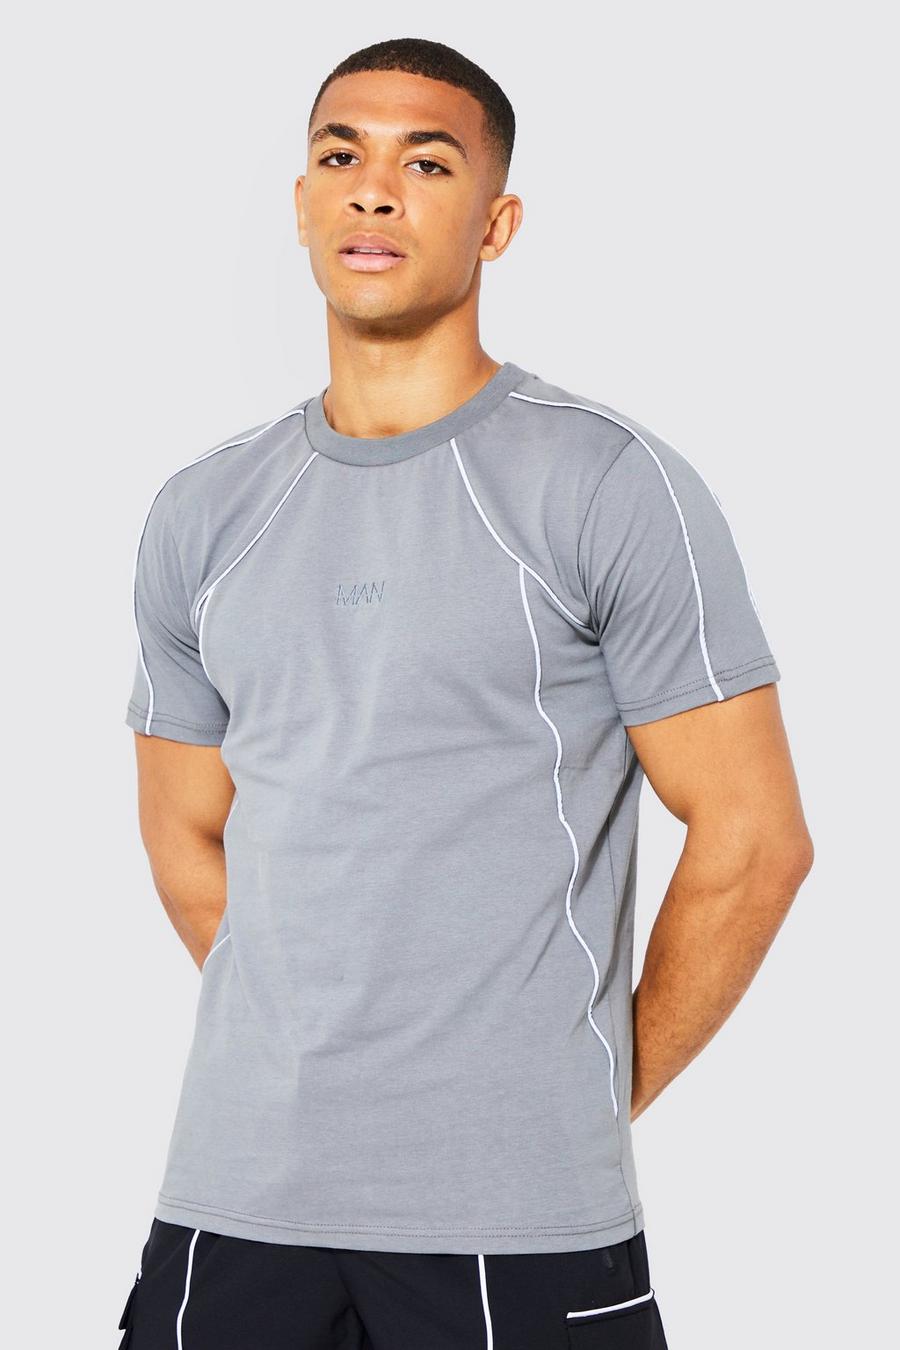 Charcoal grey Slim Fit T-shirt With Reflective Piping